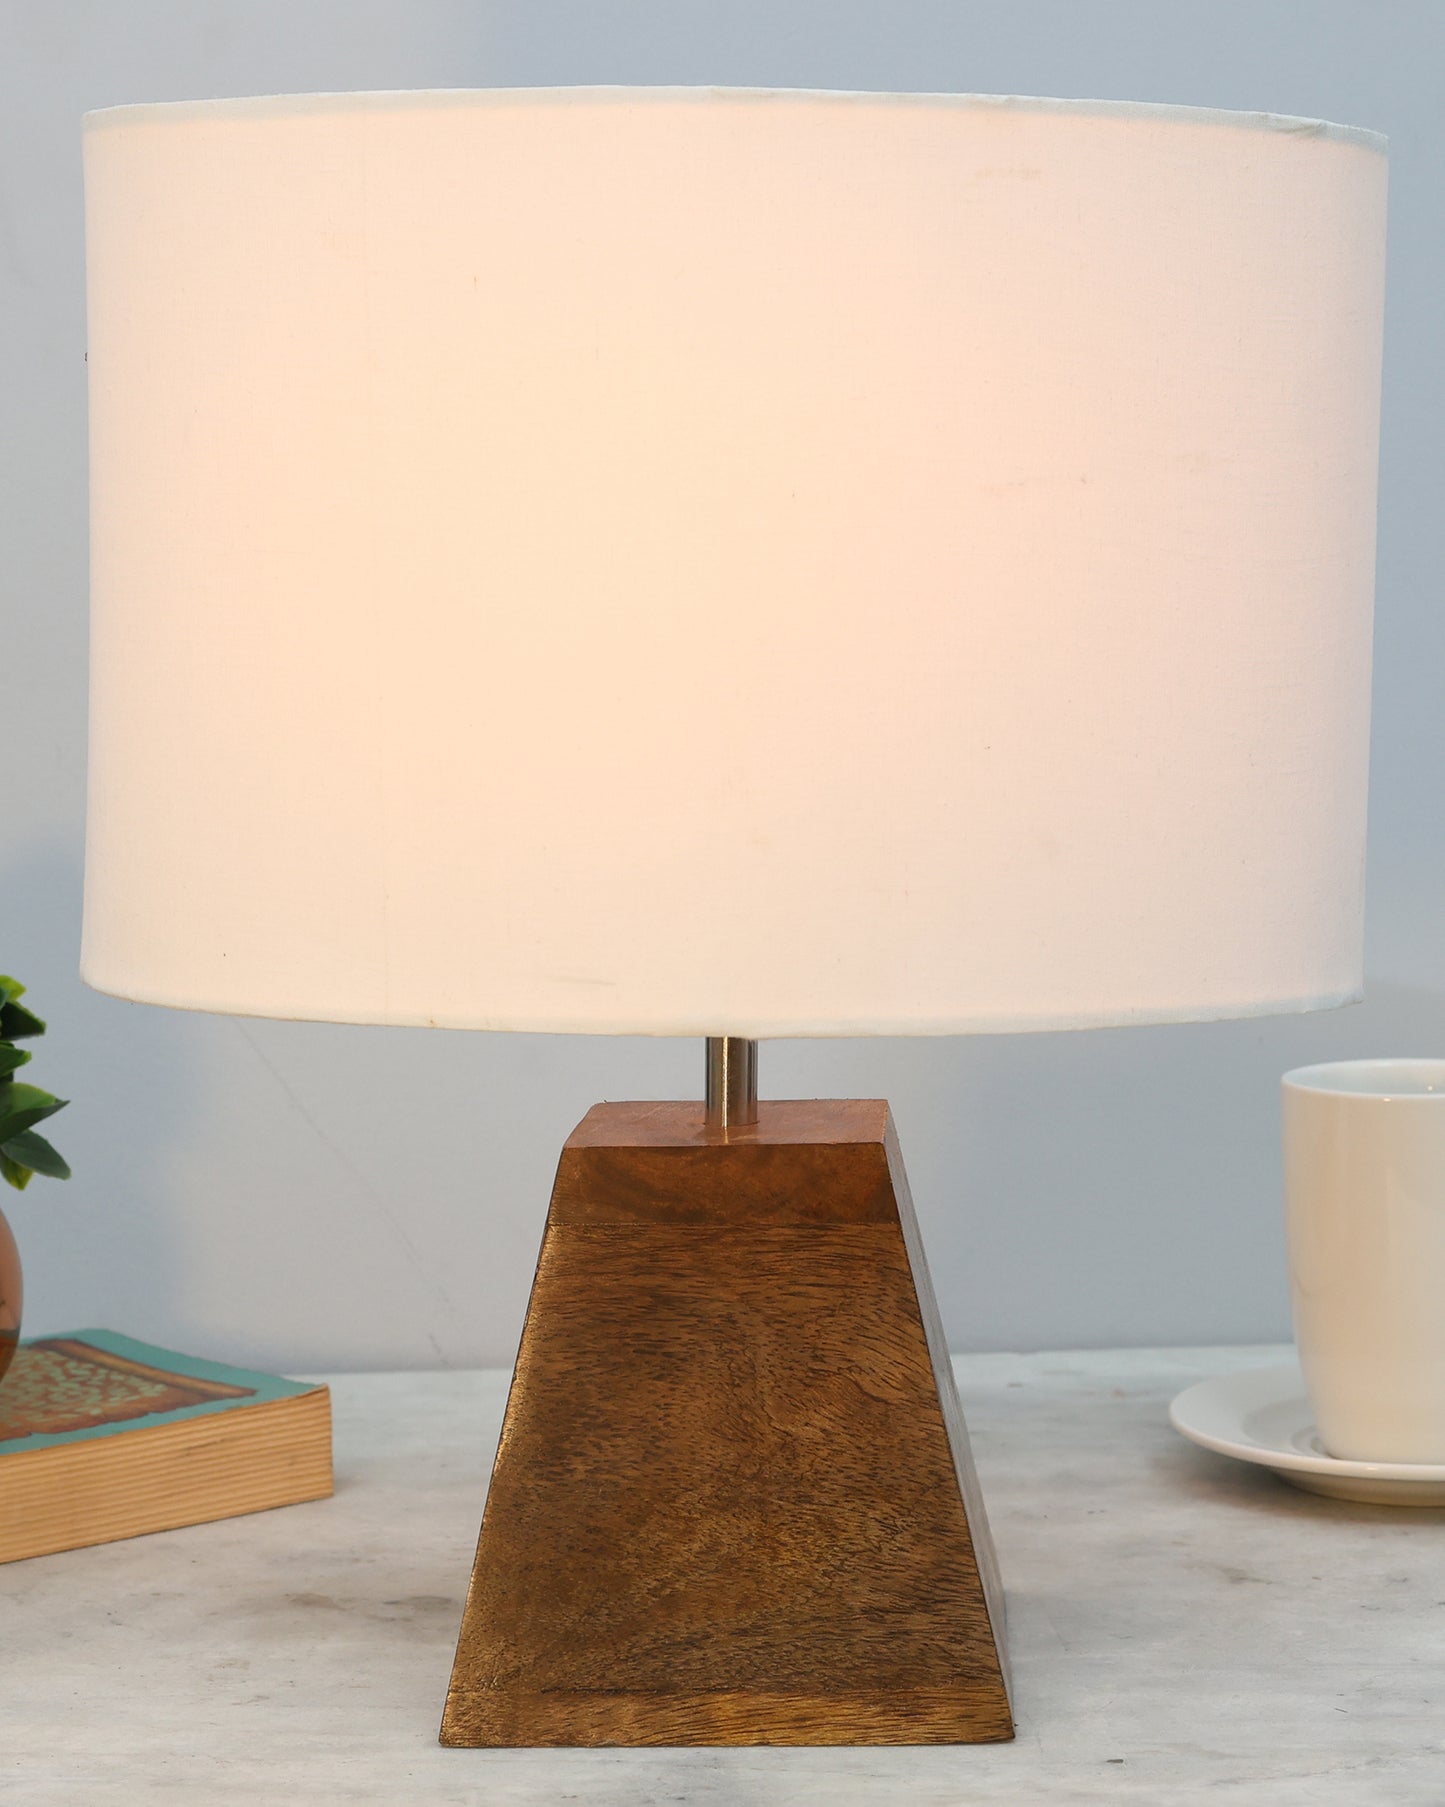 Wood Table Lamp, Modern Base Fabric Lampshade for Home Office Cafe Restaurant, Pyramid, Oval White